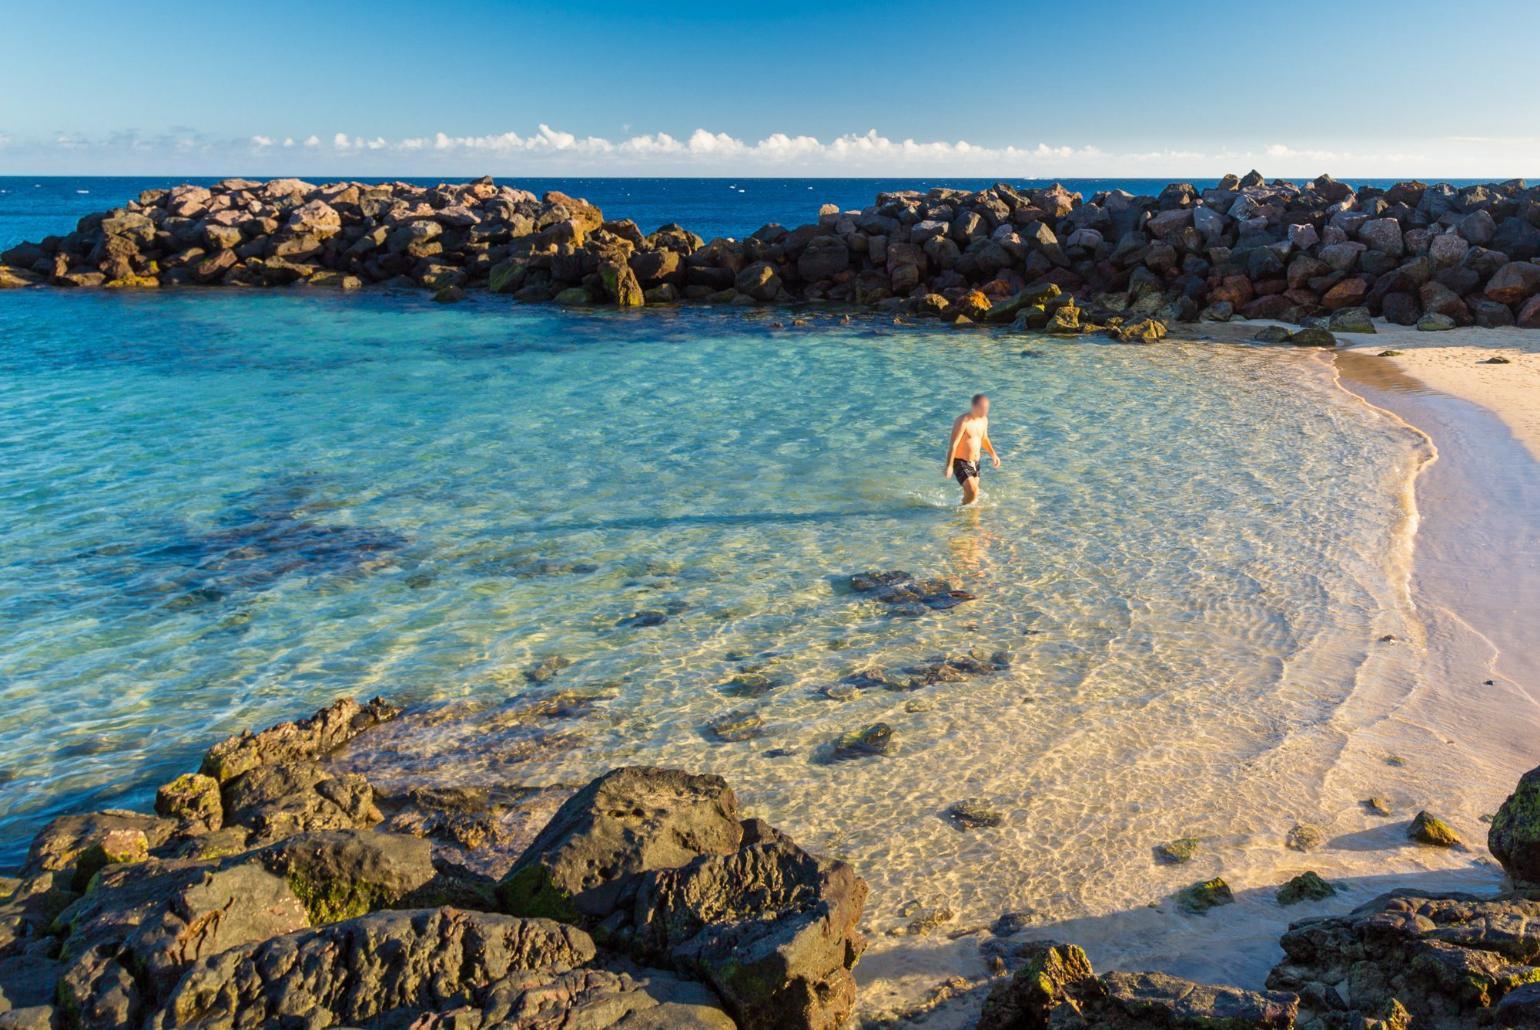 Crystal clear waters at Costa Teguise